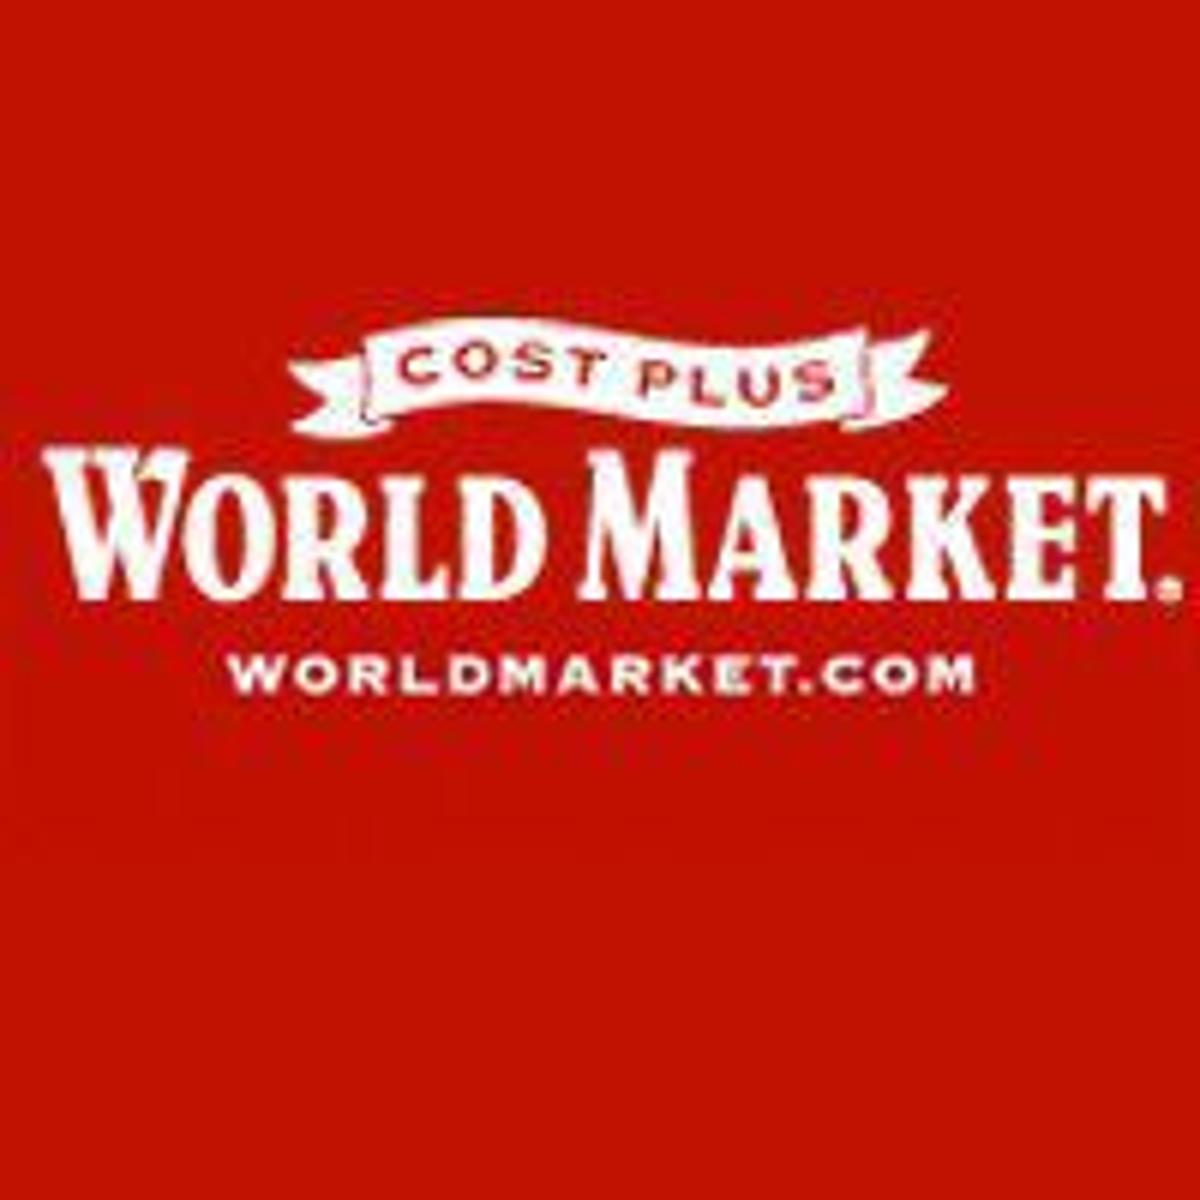 World Market coupons and promo codes